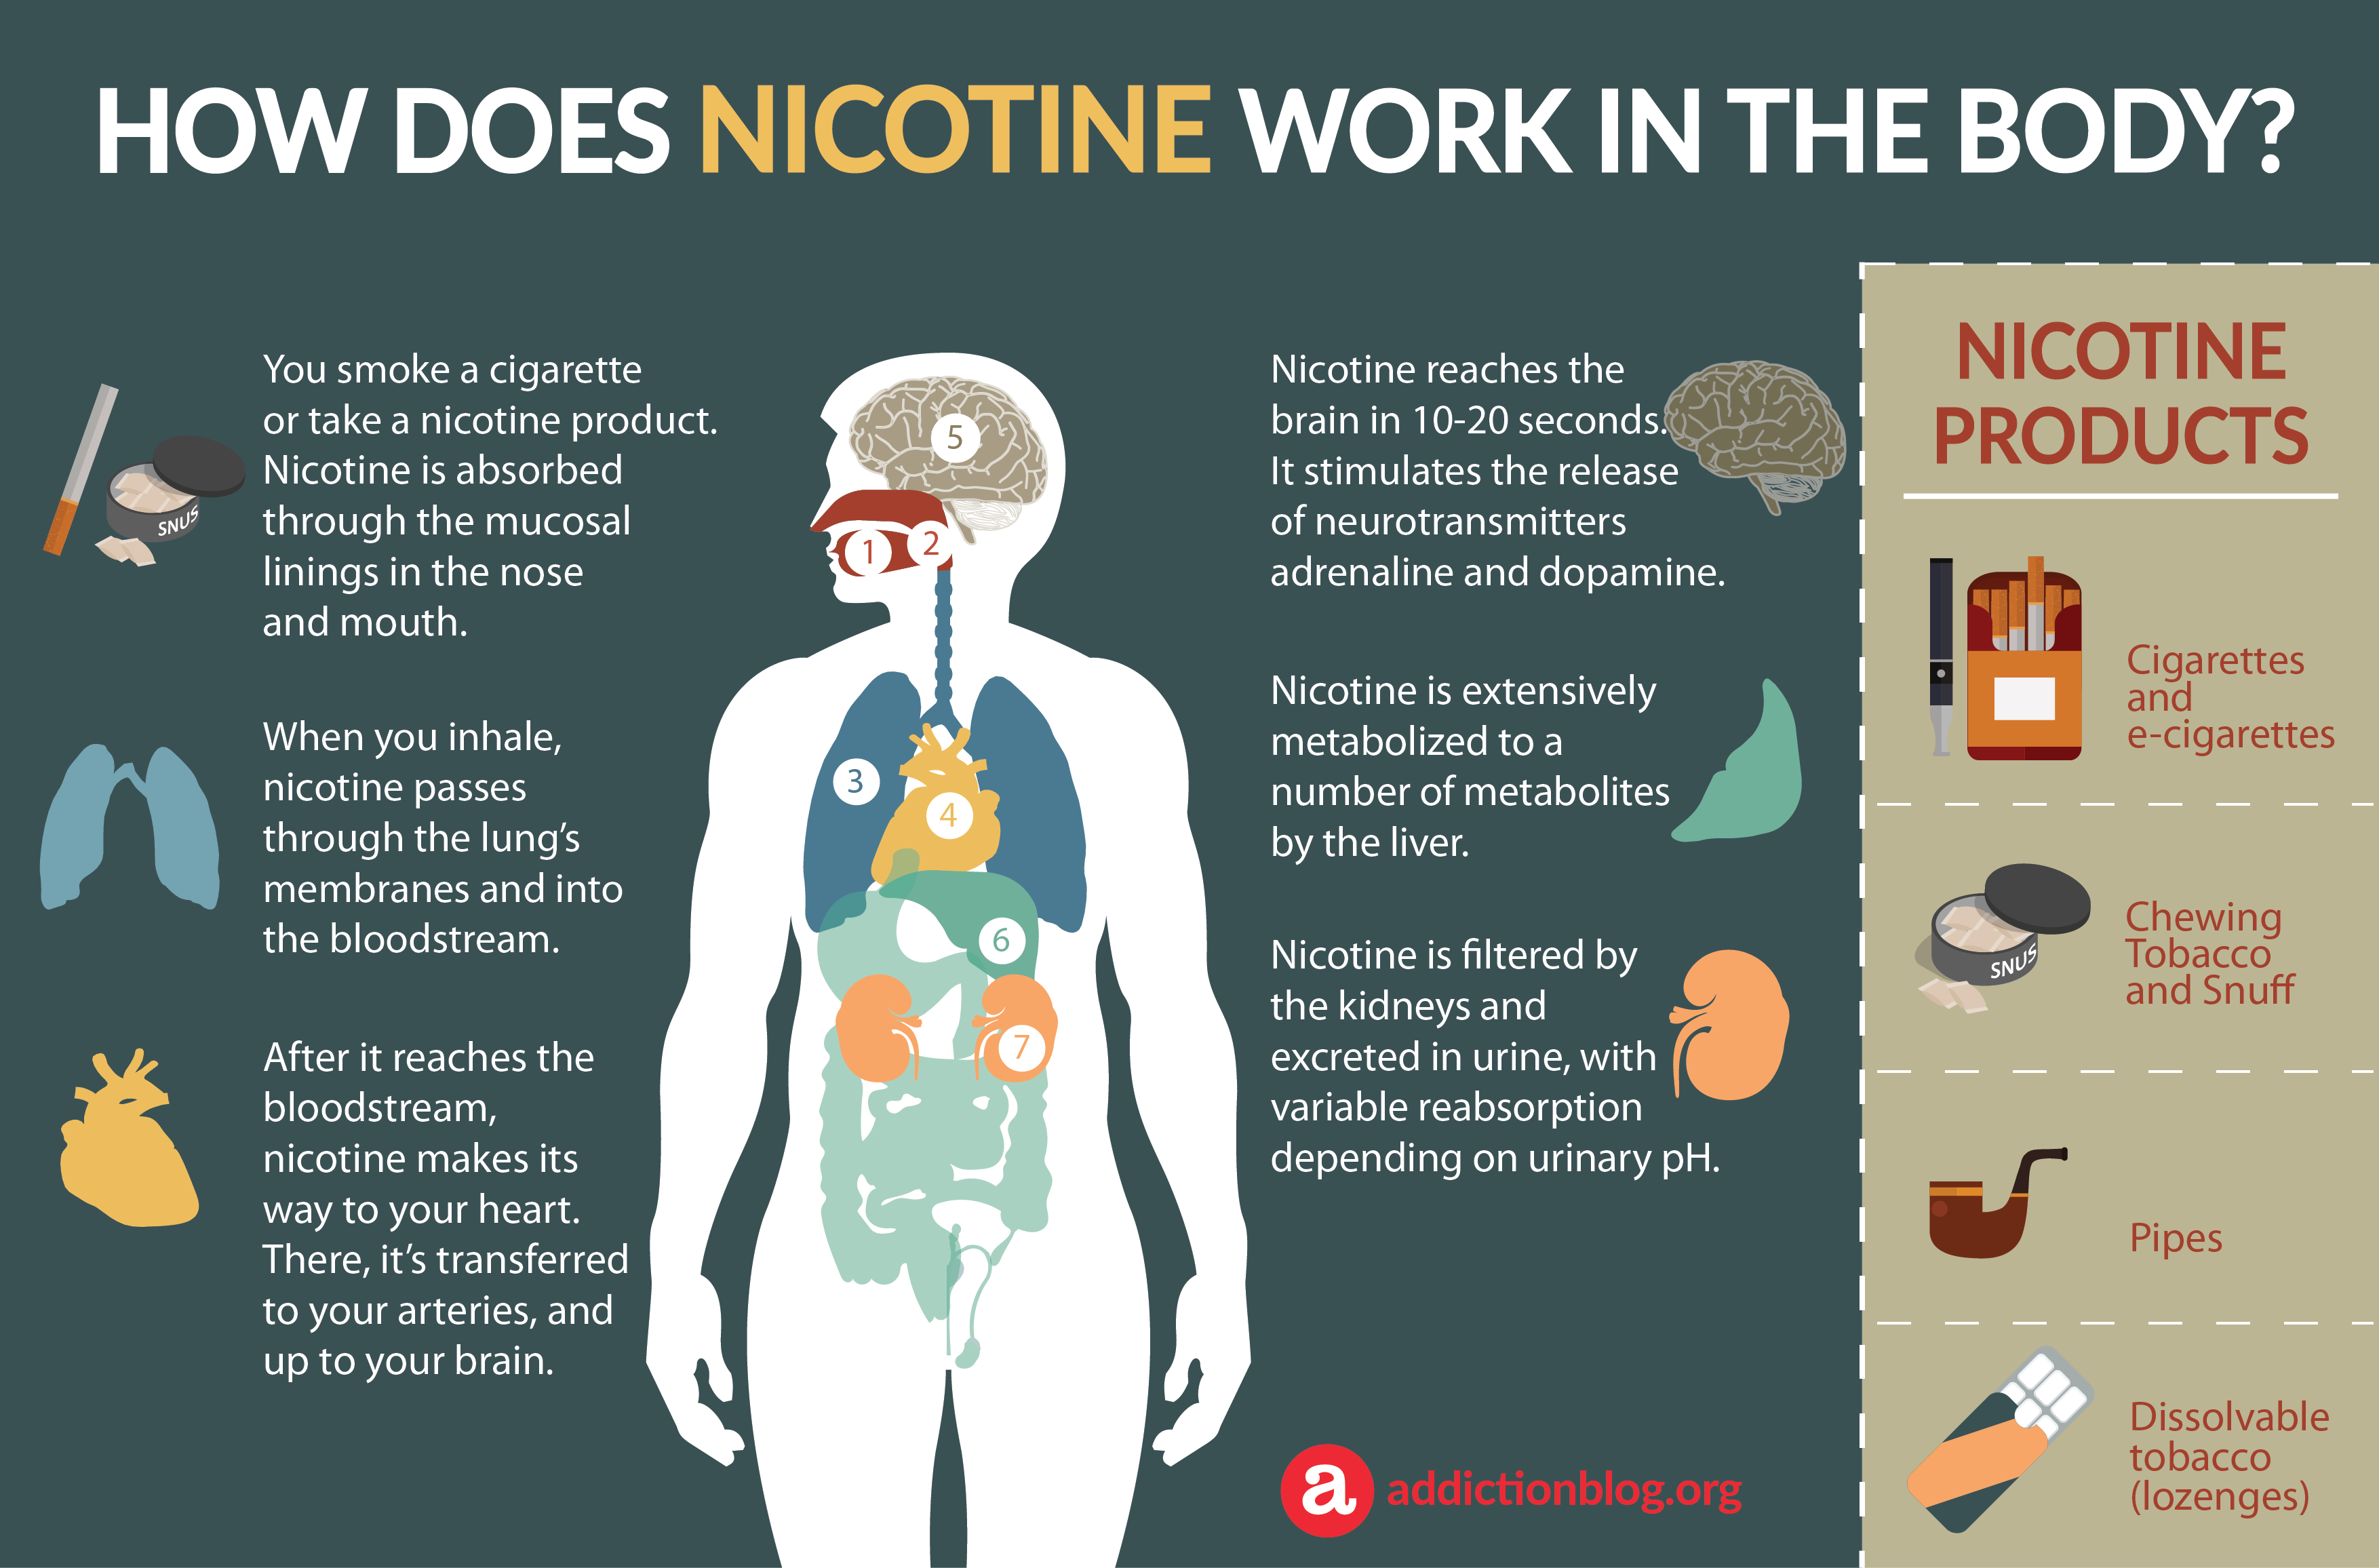 How Does Nicotine Affect the Nervous System?